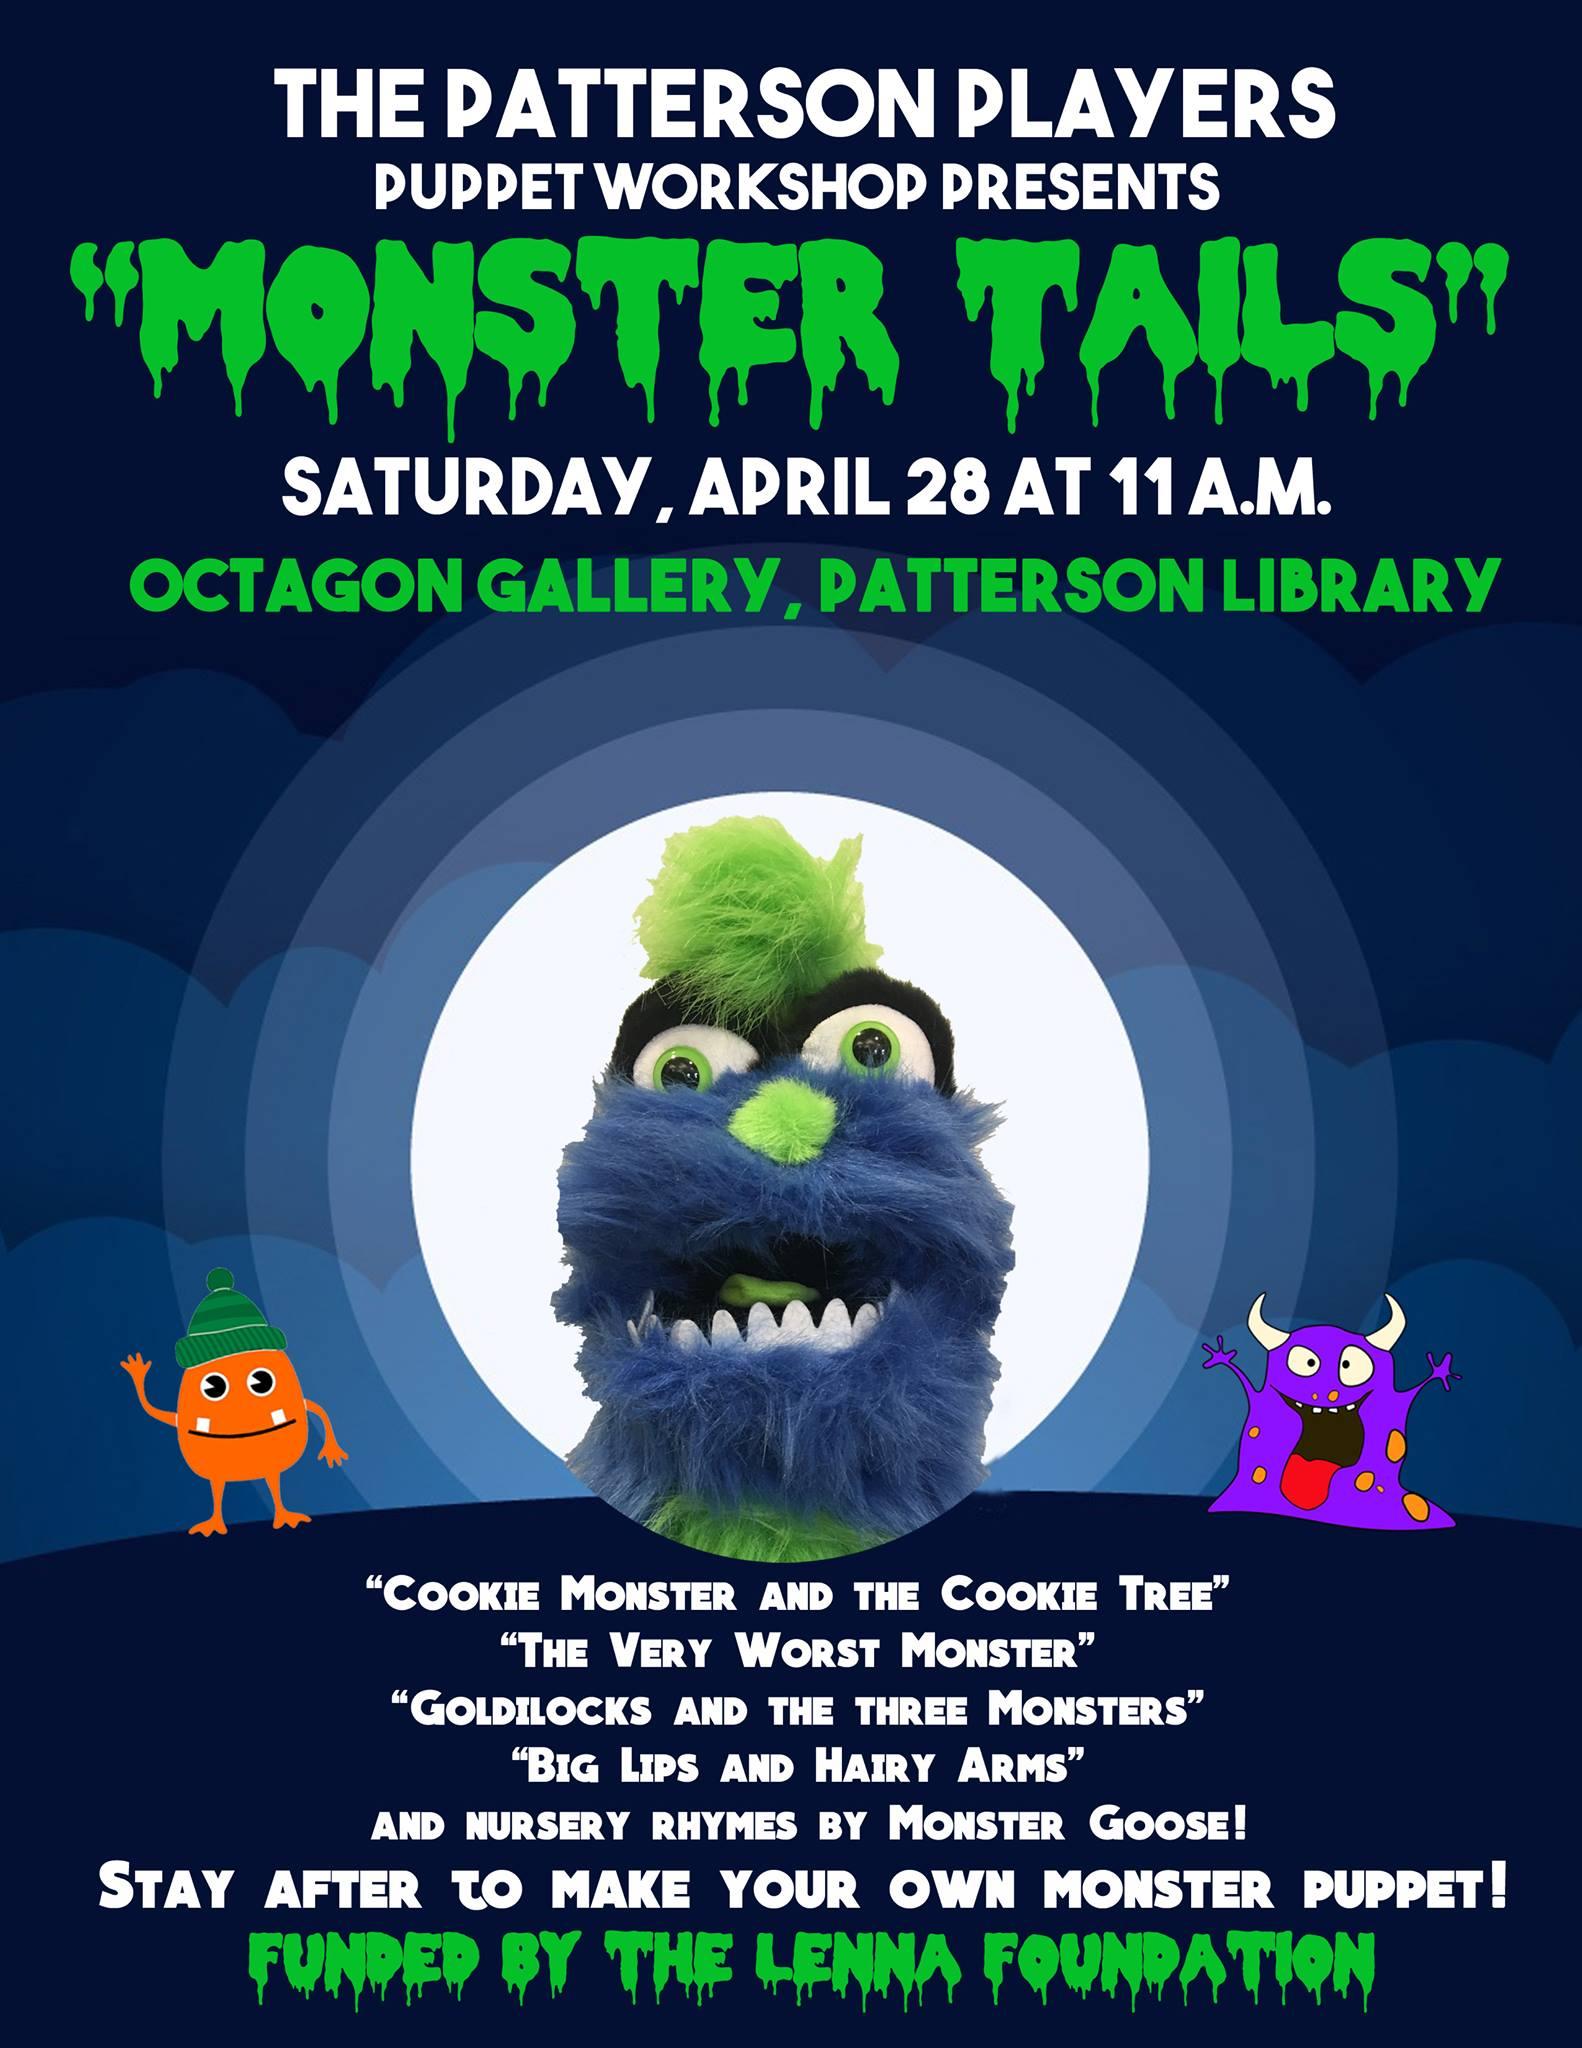 Monster Tails by The Patterson Players